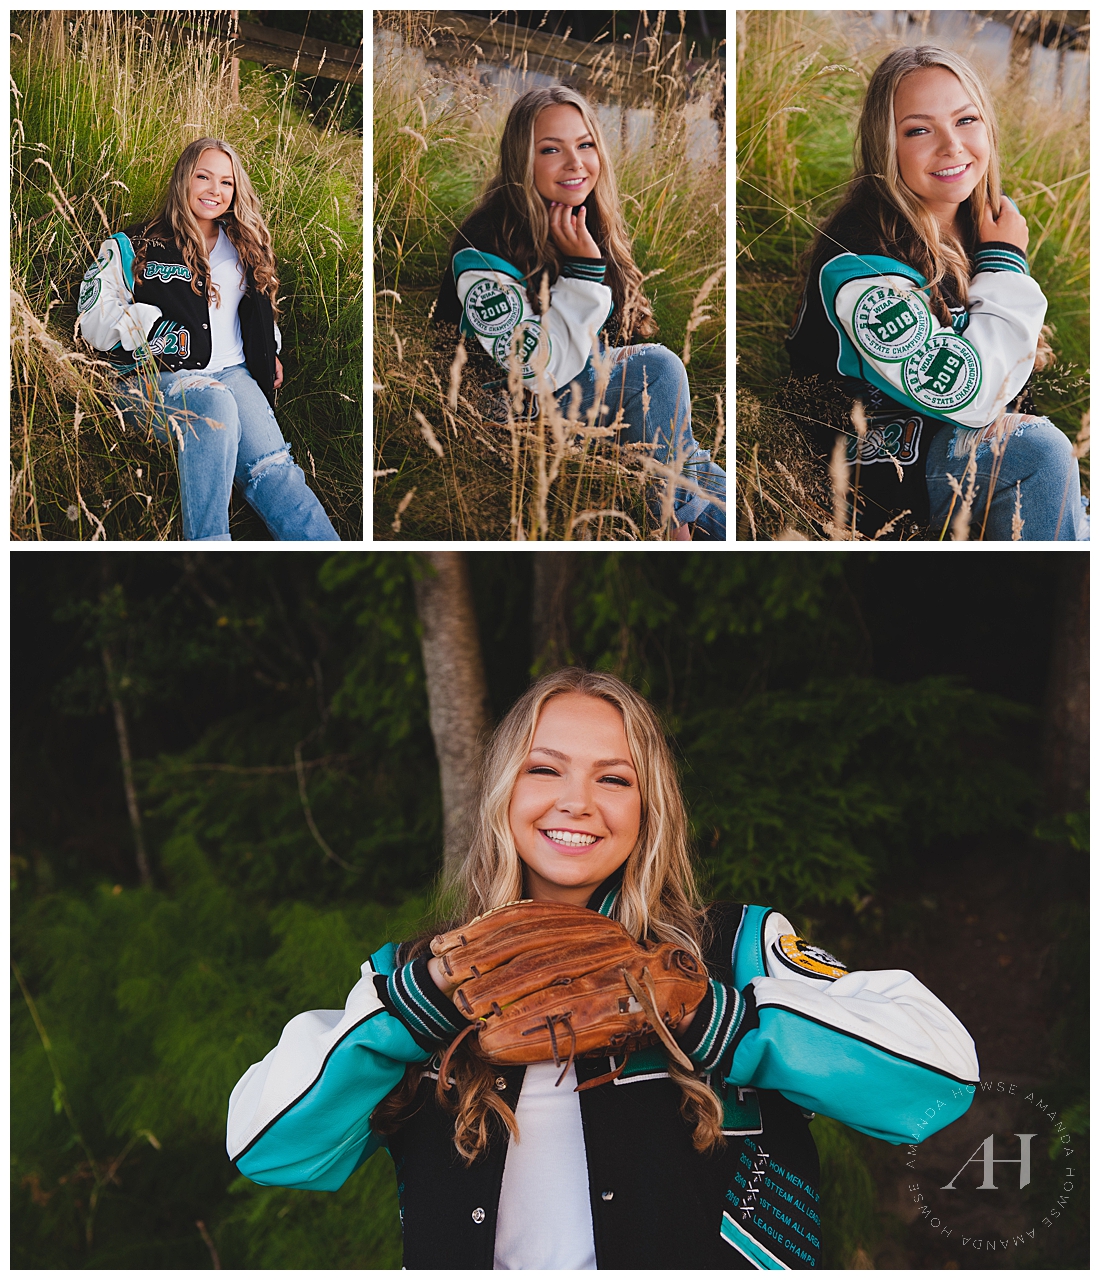 High School Senior Portraits of Softball Player | How to incorporate props into your senior portrait session, senior photos for athletes, Tacoma sports, Tacoma athlete portraits, how to style a letter jacket for senior portraits | Photographed by the Best Tacoma Senior Photographer Amanda Howse